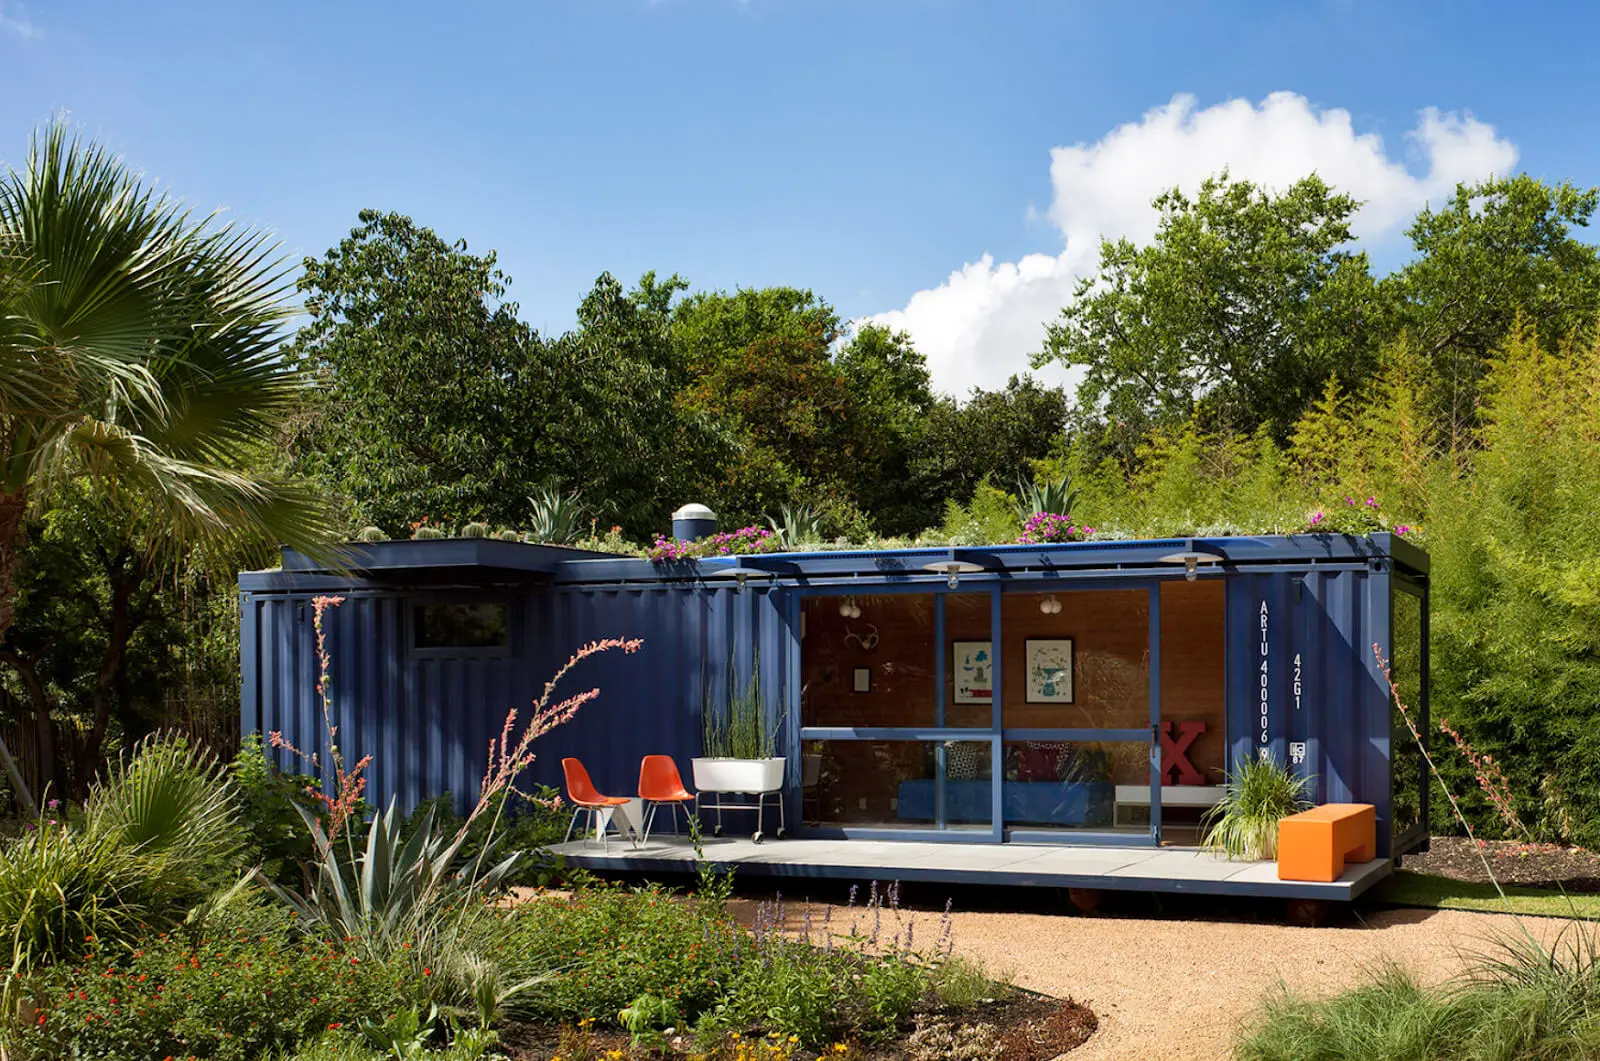 Turn Your Shipping Container Into the Ultimate Garden Shed